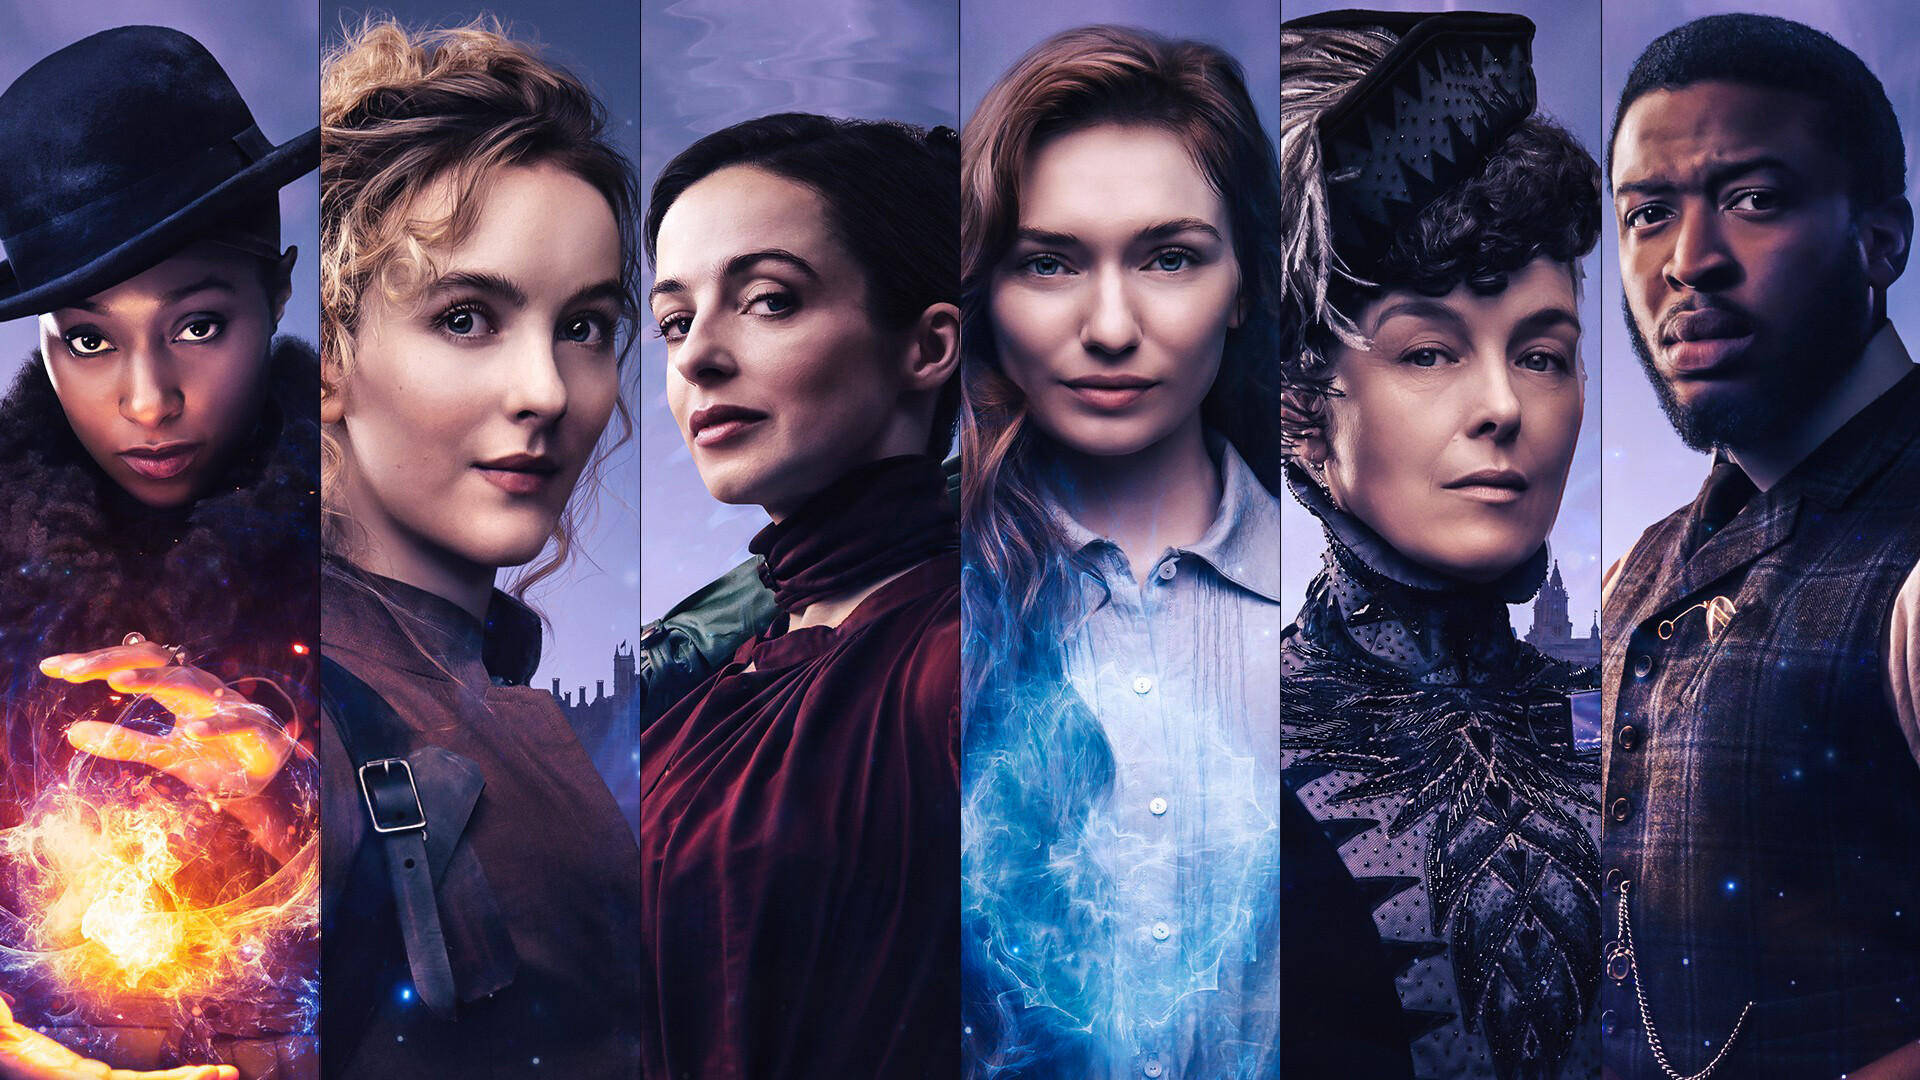 The Nevers: Amalia True, Penance Adair, Mary Brighton, Horatio Cousens, Annie Carbey. 1920x1080 Full HD Background.